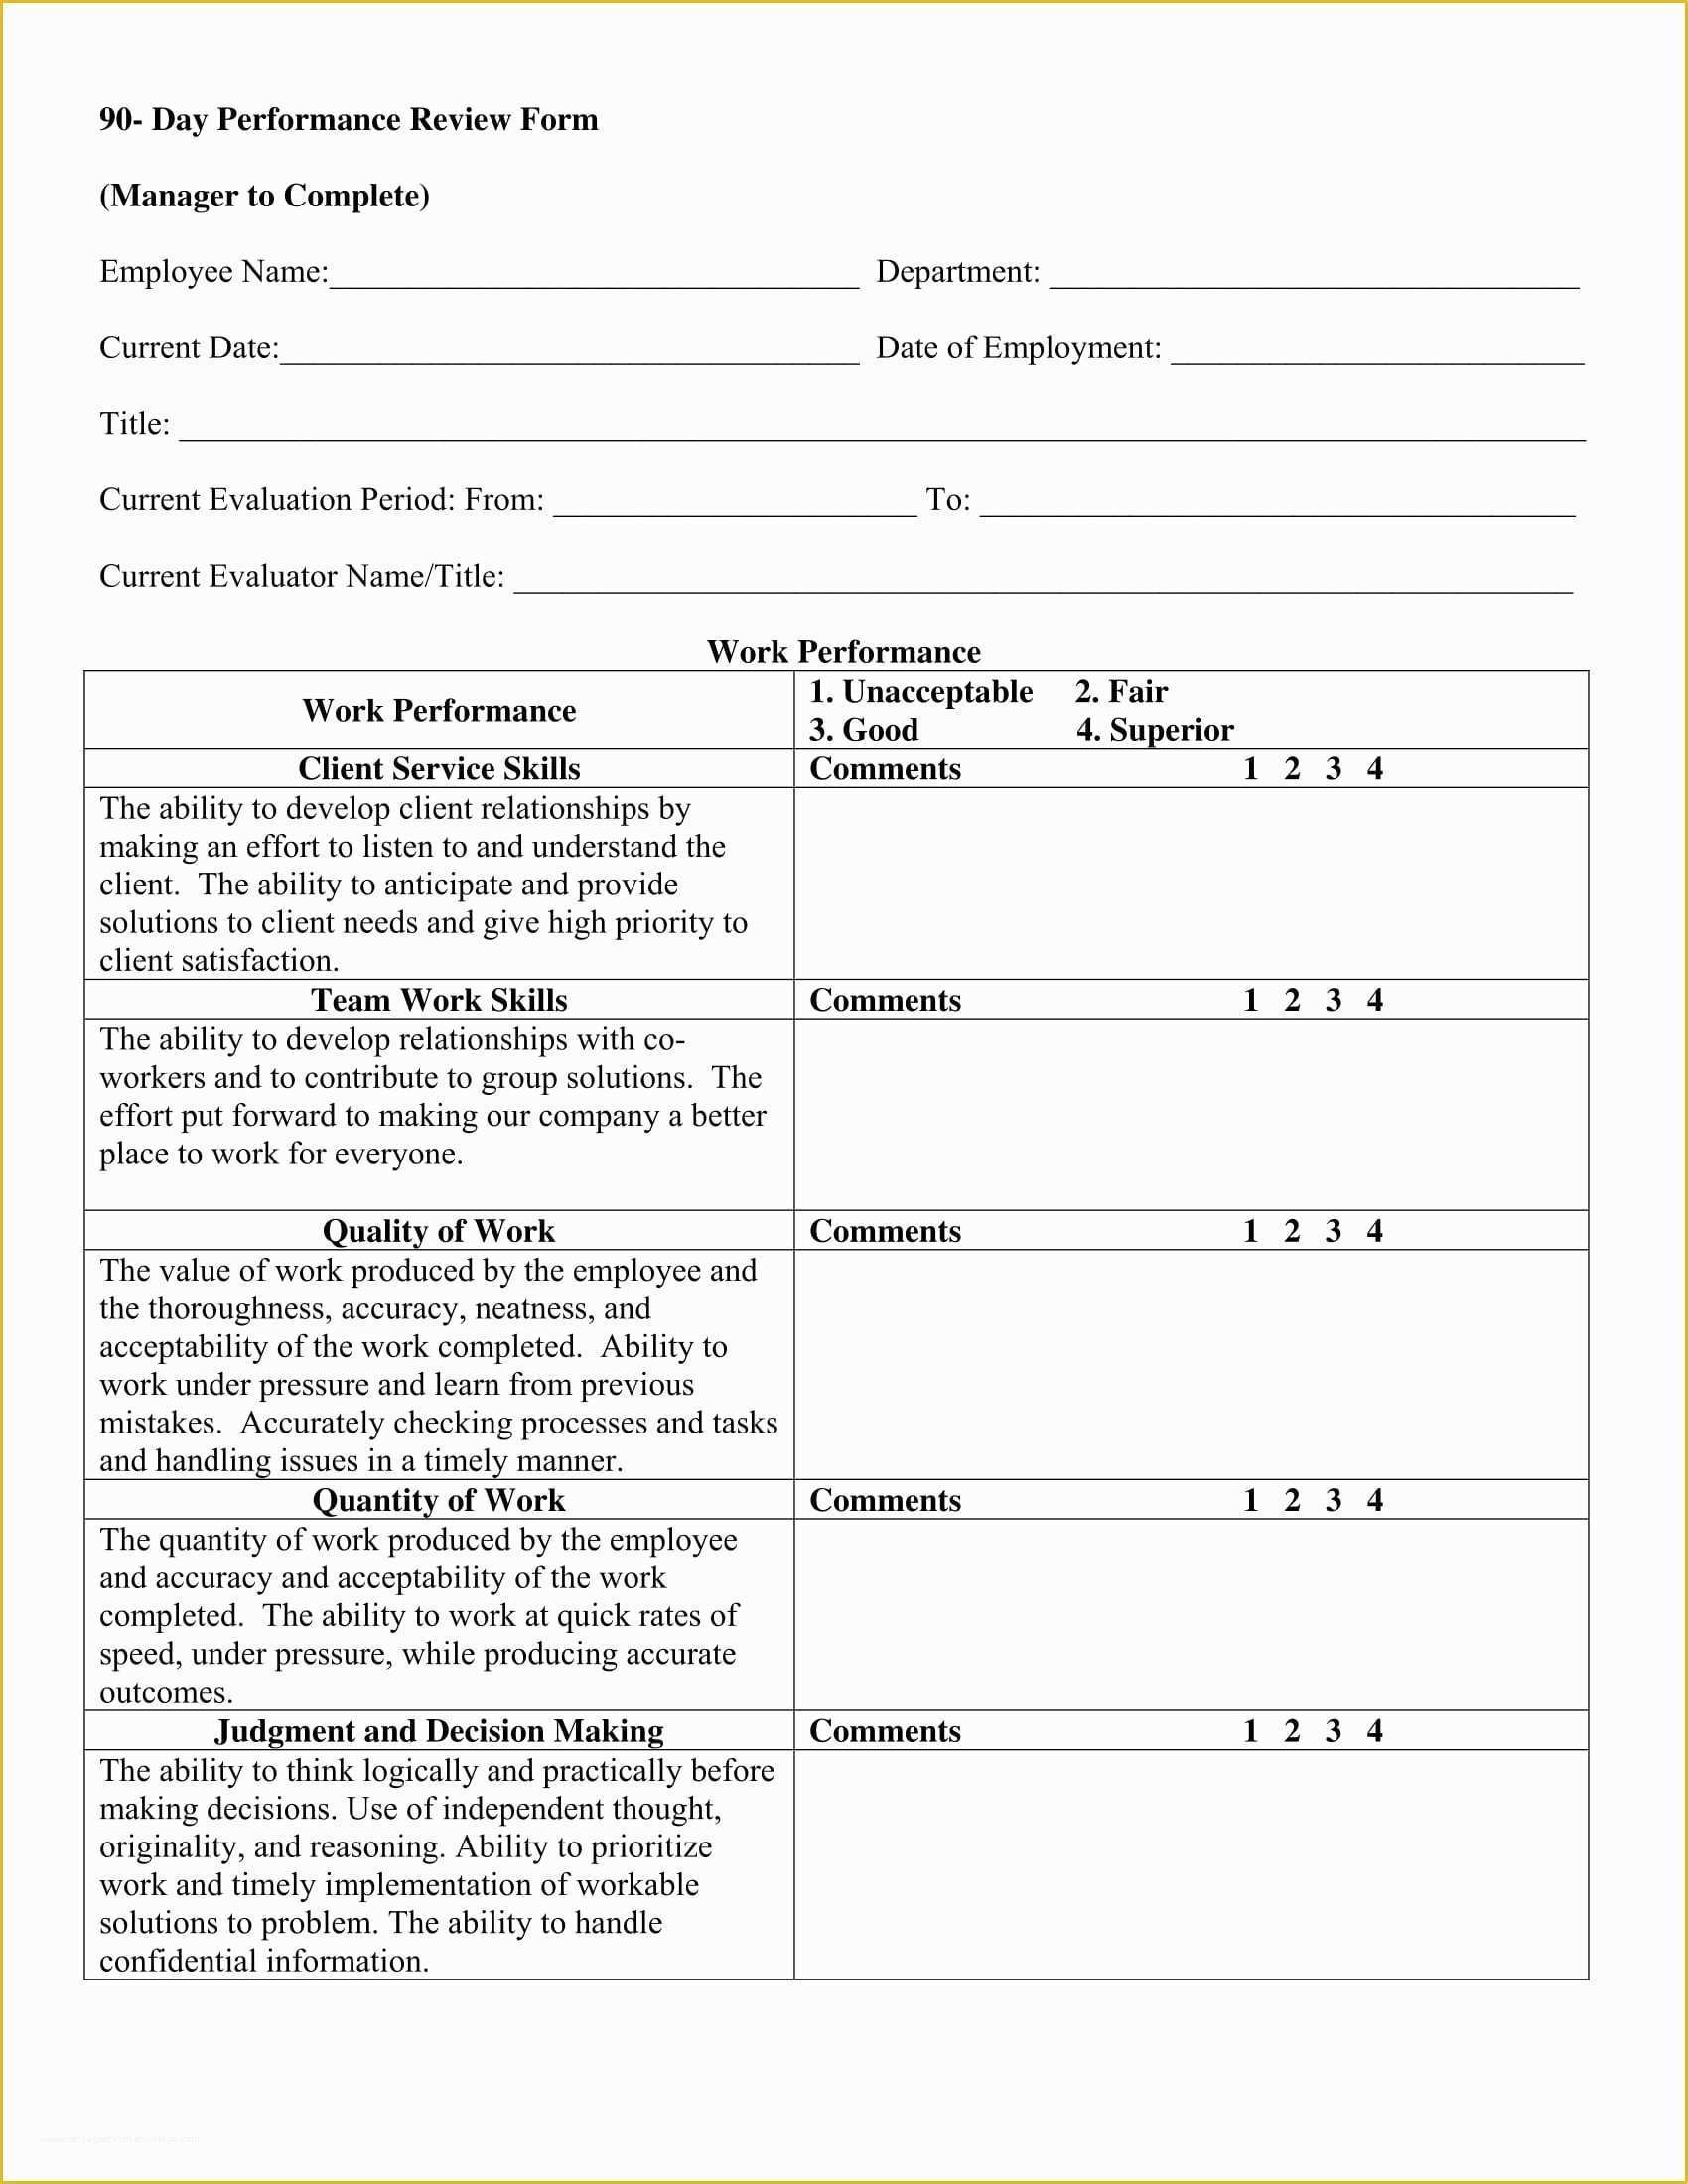 Employee Review form Template Free Of 14 90 Day Review forms Free Word